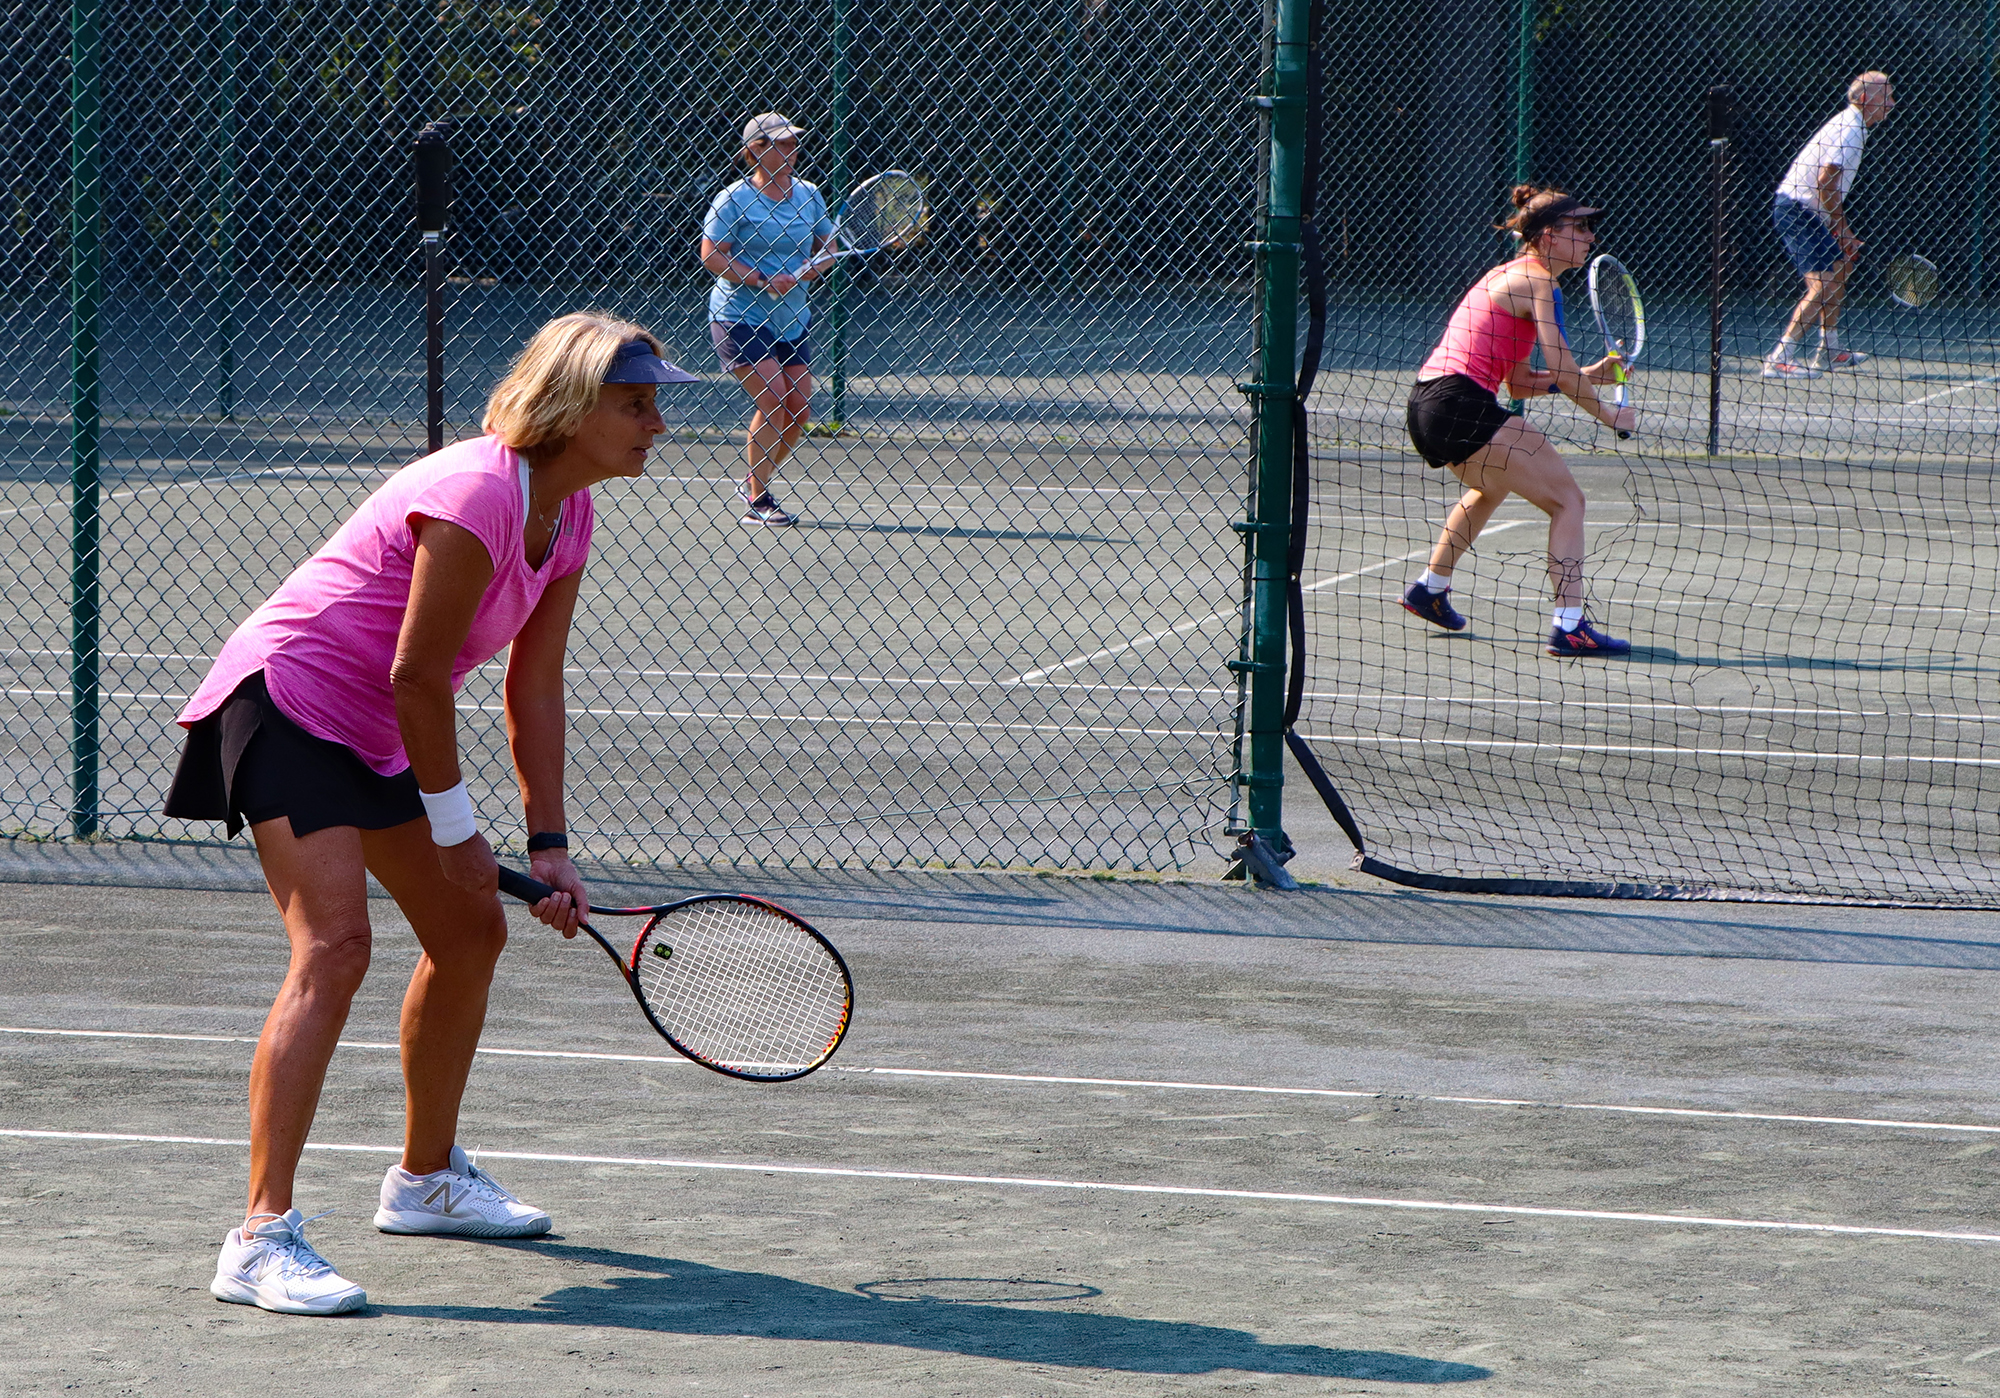 Color photo of three female tennis players on a clay court under the sun. They are in an athletic stance and have tennis rackets in hand.